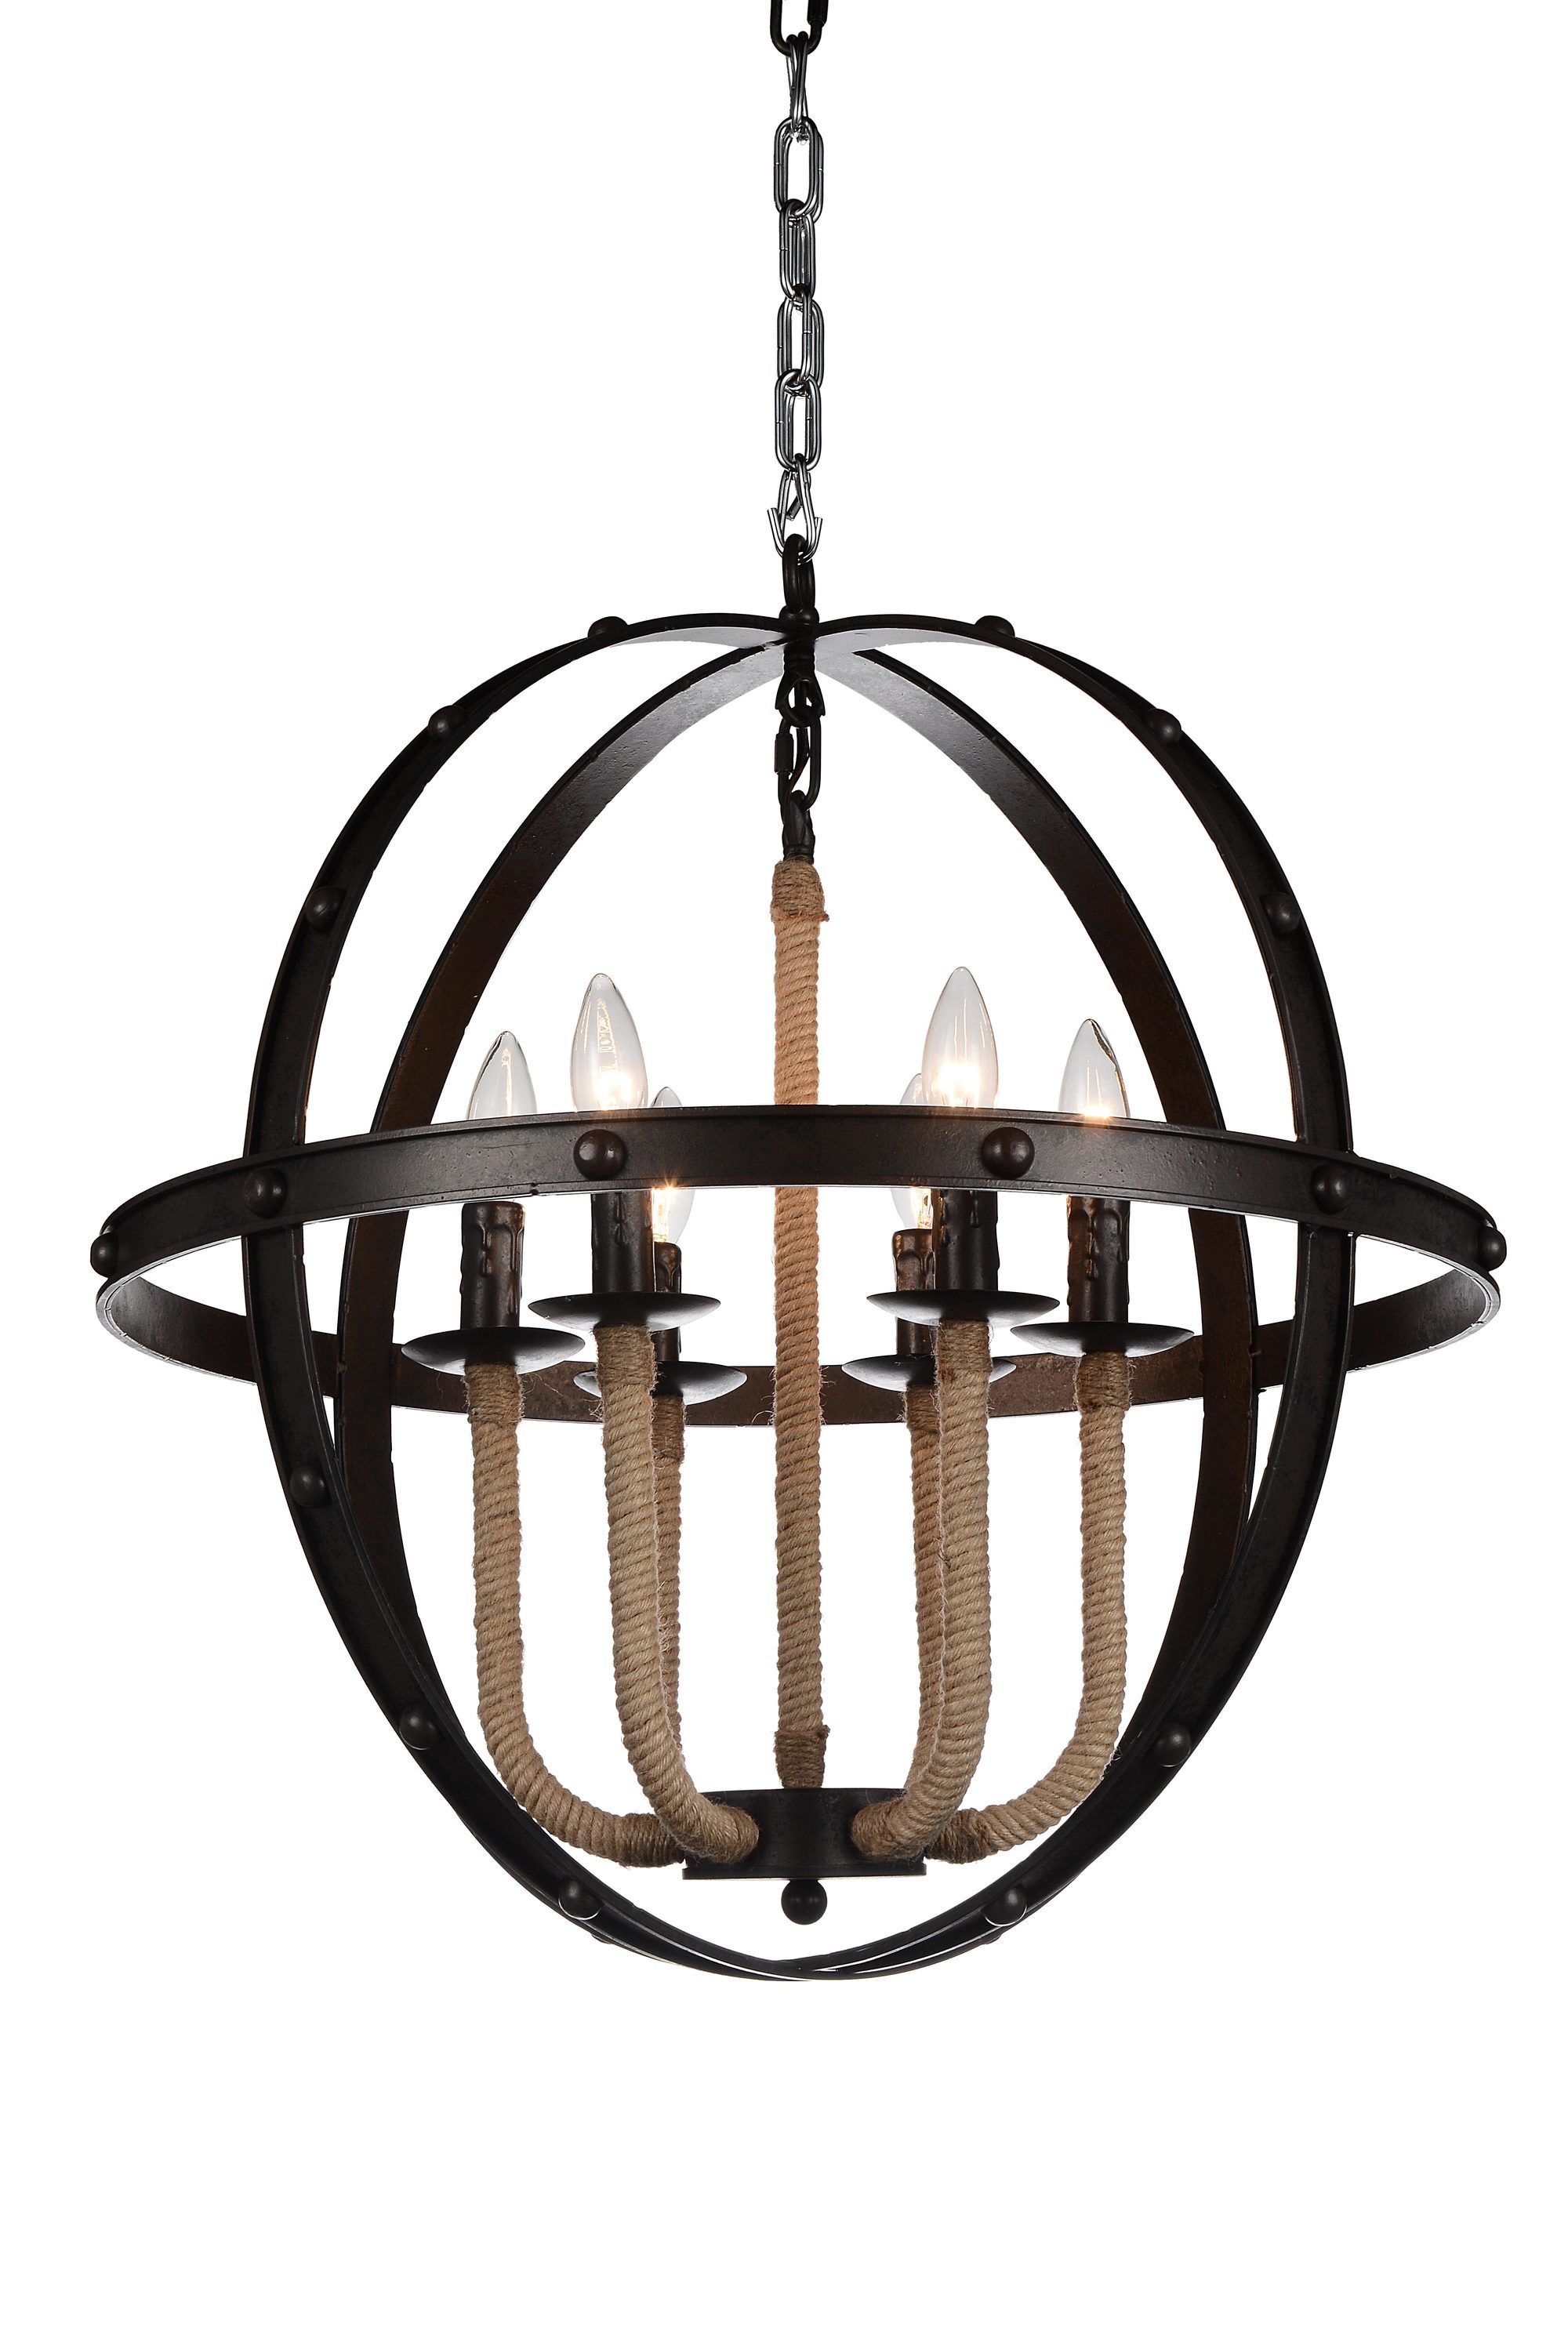 CWI Lighting Surma 6-Light Rust Rustic Damp Rated Chandelier at Lowes.com